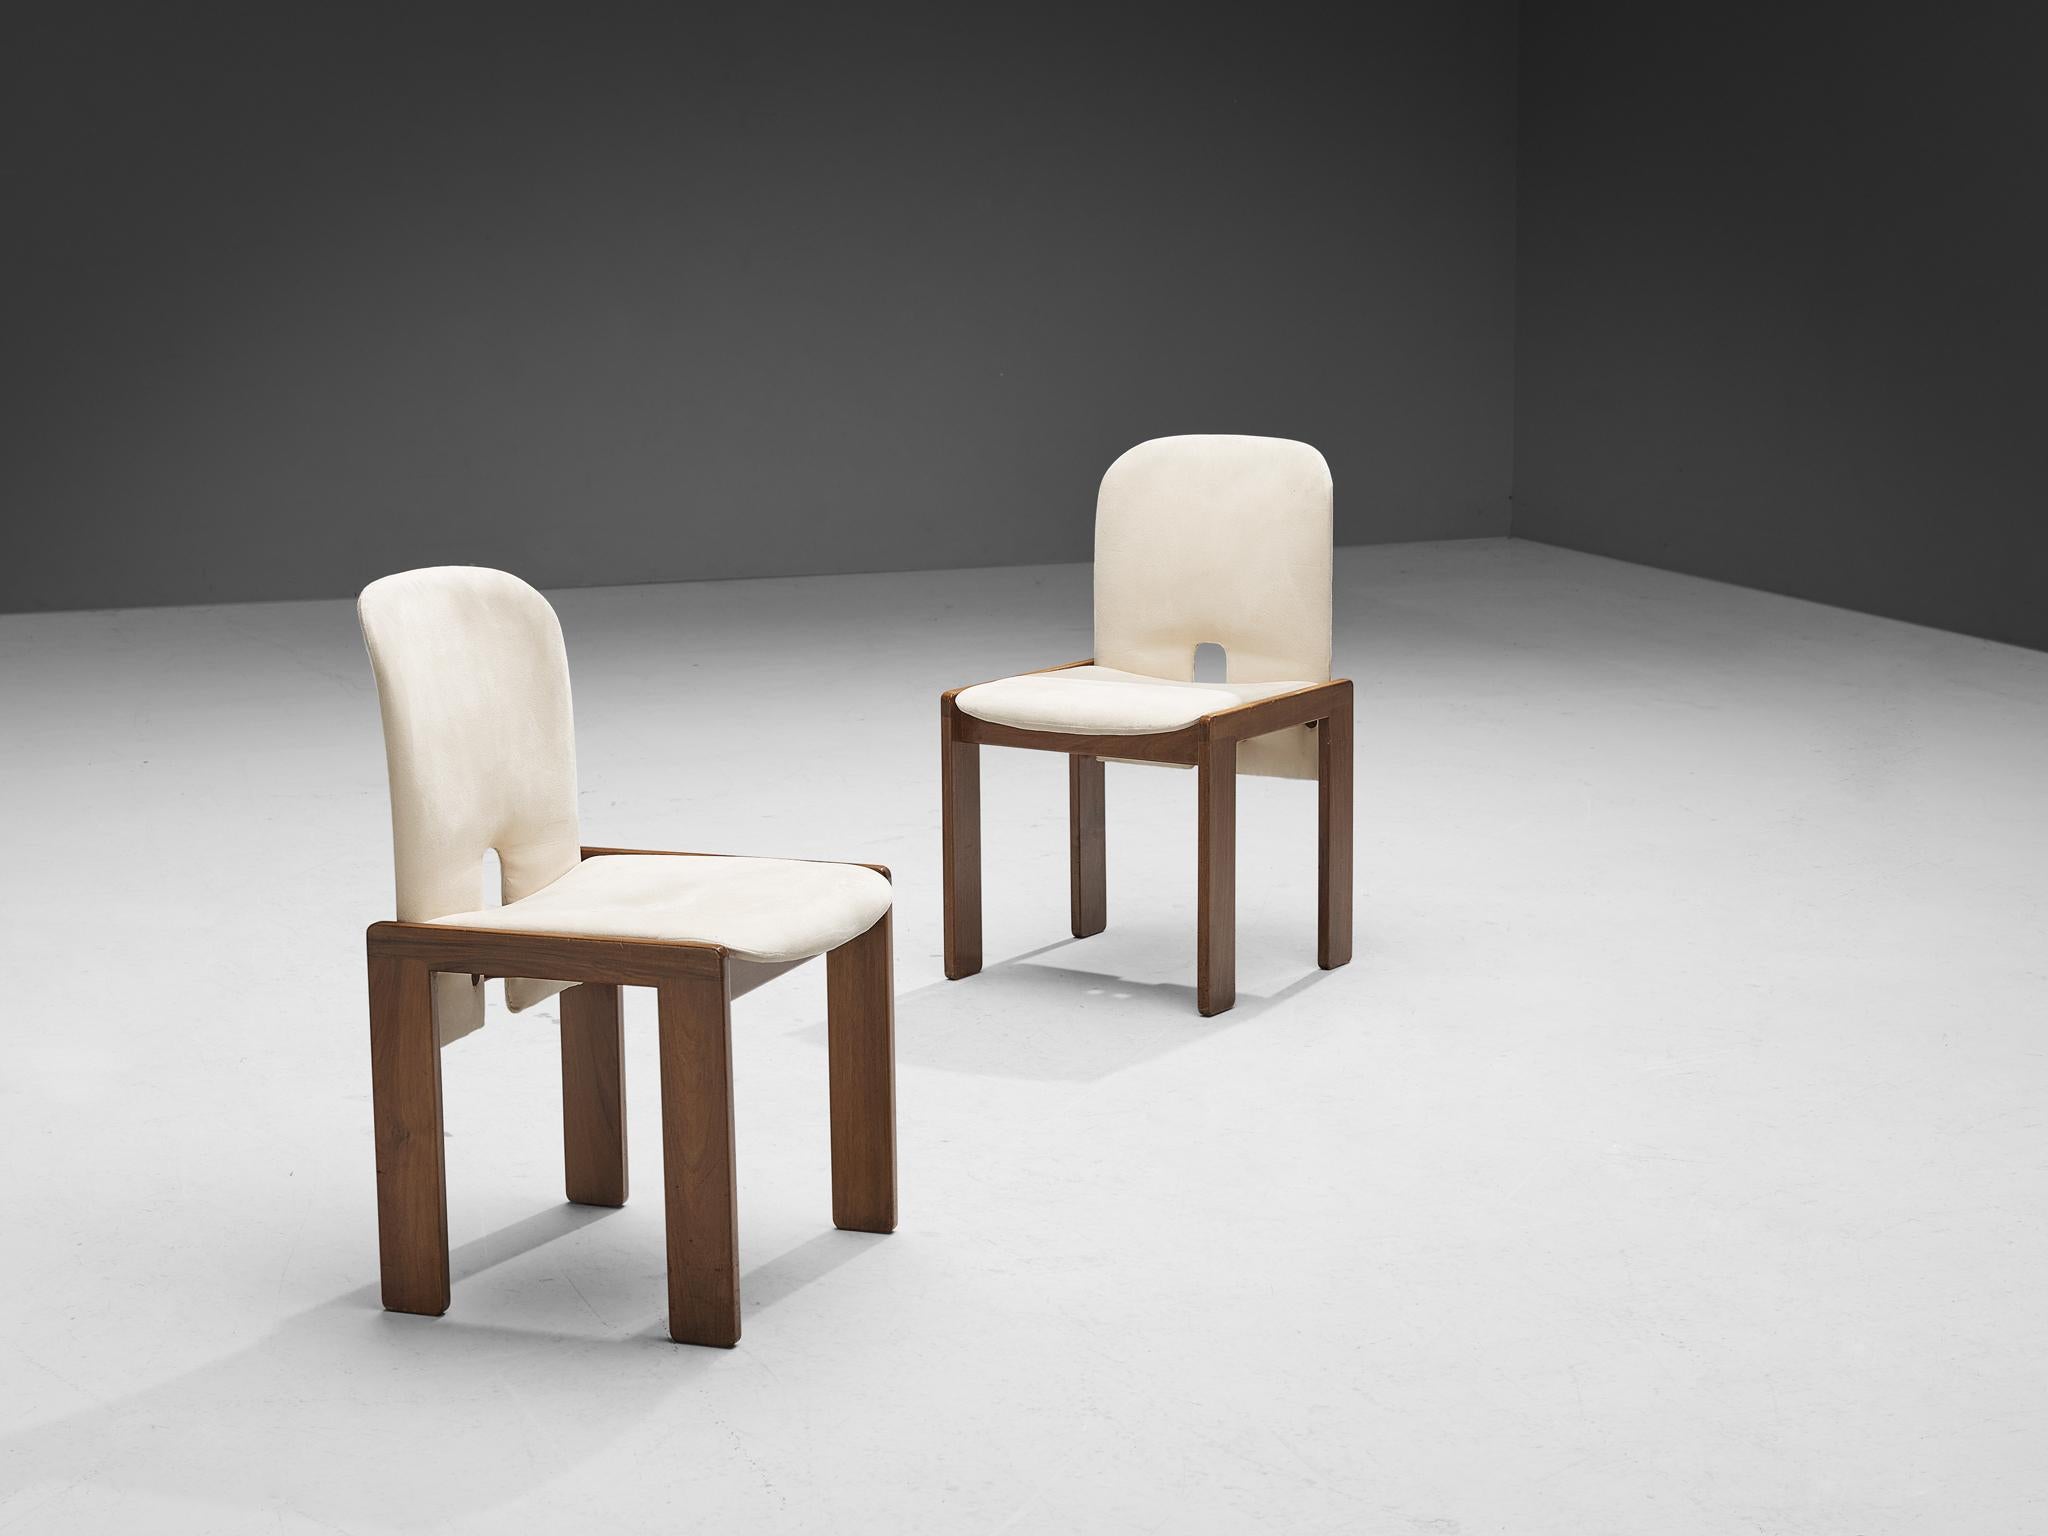 Afra & Tobia Scarpa for Cassina, pair of dining chairs model '121', walnut, fabric, Italy, design 1965

Pair of chairs by the Italian designer couple Tobia & Afra Scarpa. These chairs have a cubic and architectural appearance. The base consists of